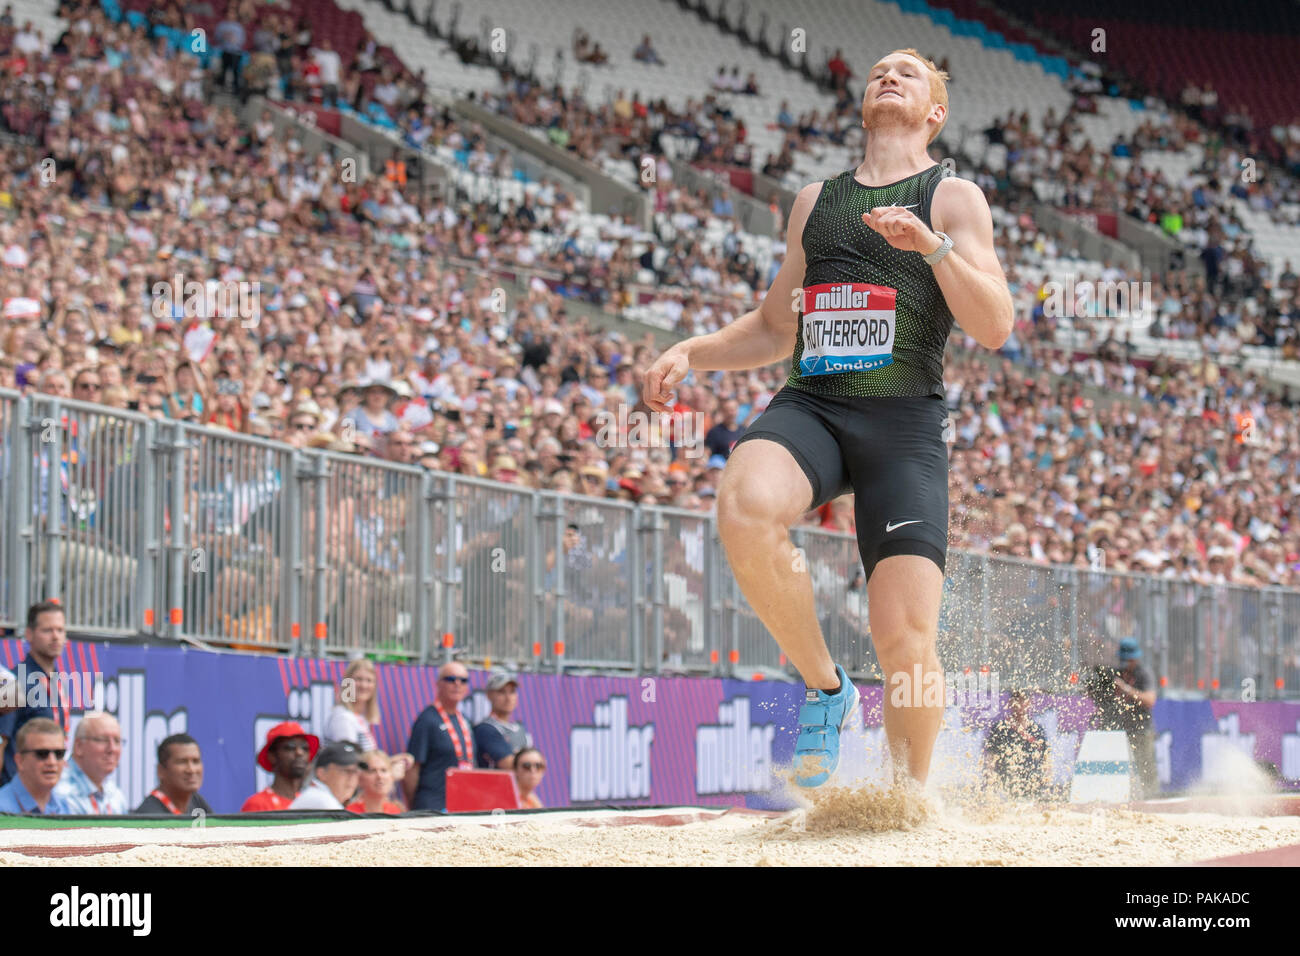 London, UK. 22nd July 2018. Greg Rutherford (GBR) runs through the take-off board in his final long jump competition at the Muller Anniversary Games at the London Stadium, London, Great Britiain, on 22 July 2018. Credit: Andrew Peat/Alamy Live News Stock Photo